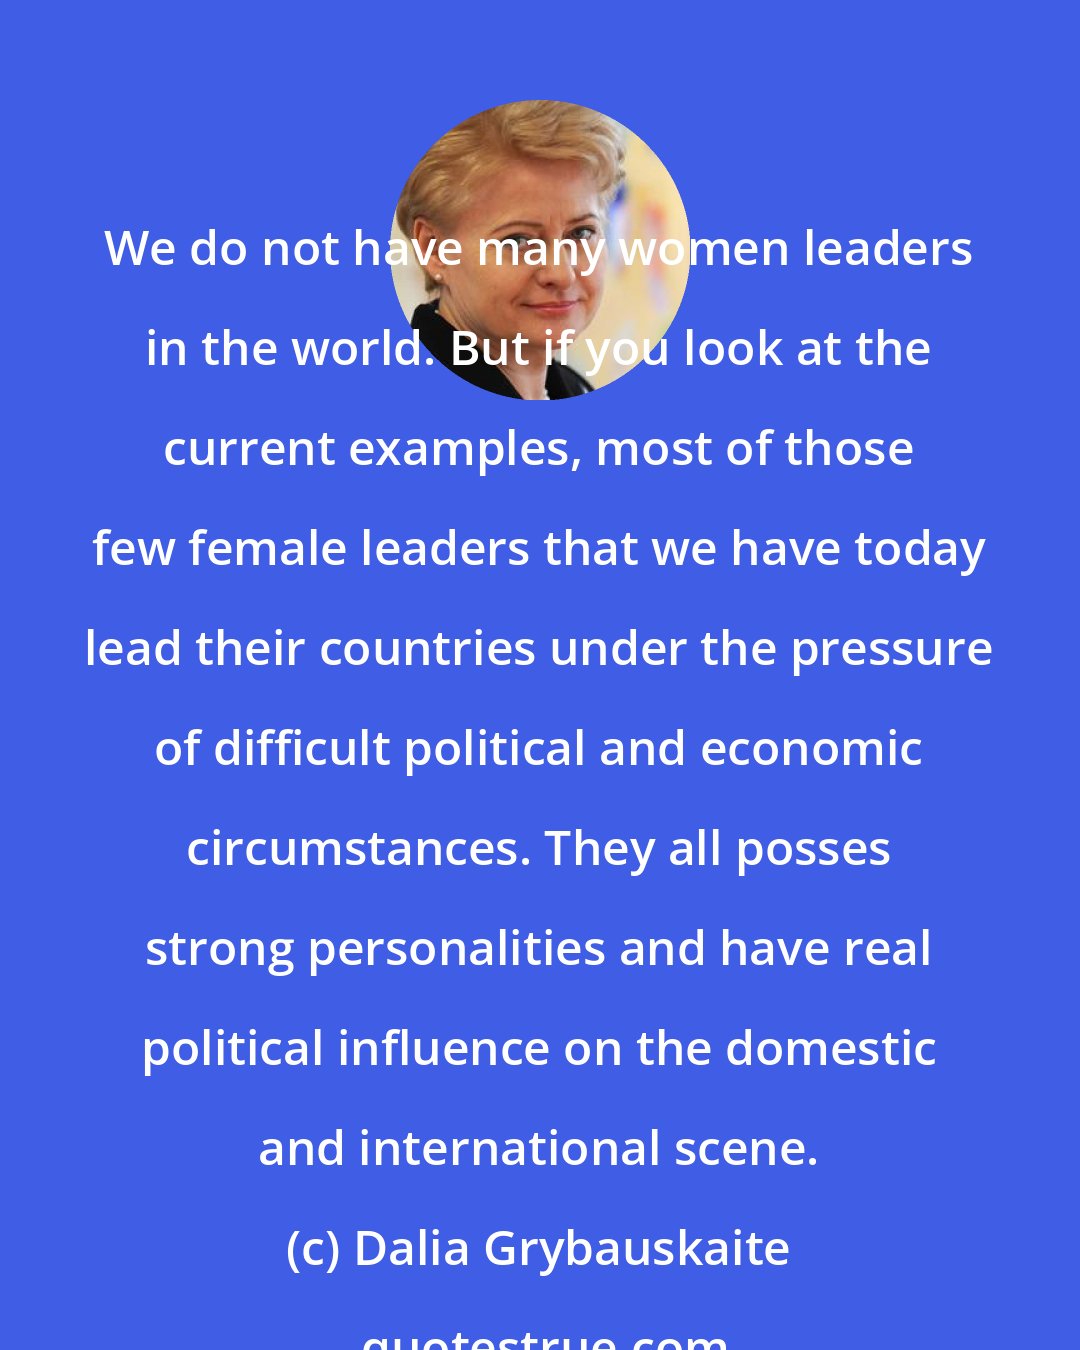 Dalia Grybauskaite: We do not have many women leaders in the world. But if you look at the current examples, most of those few female leaders that we have today lead their countries under the pressure of difficult political and economic circumstances. They all posses strong personalities and have real political influence on the domestic and international scene.